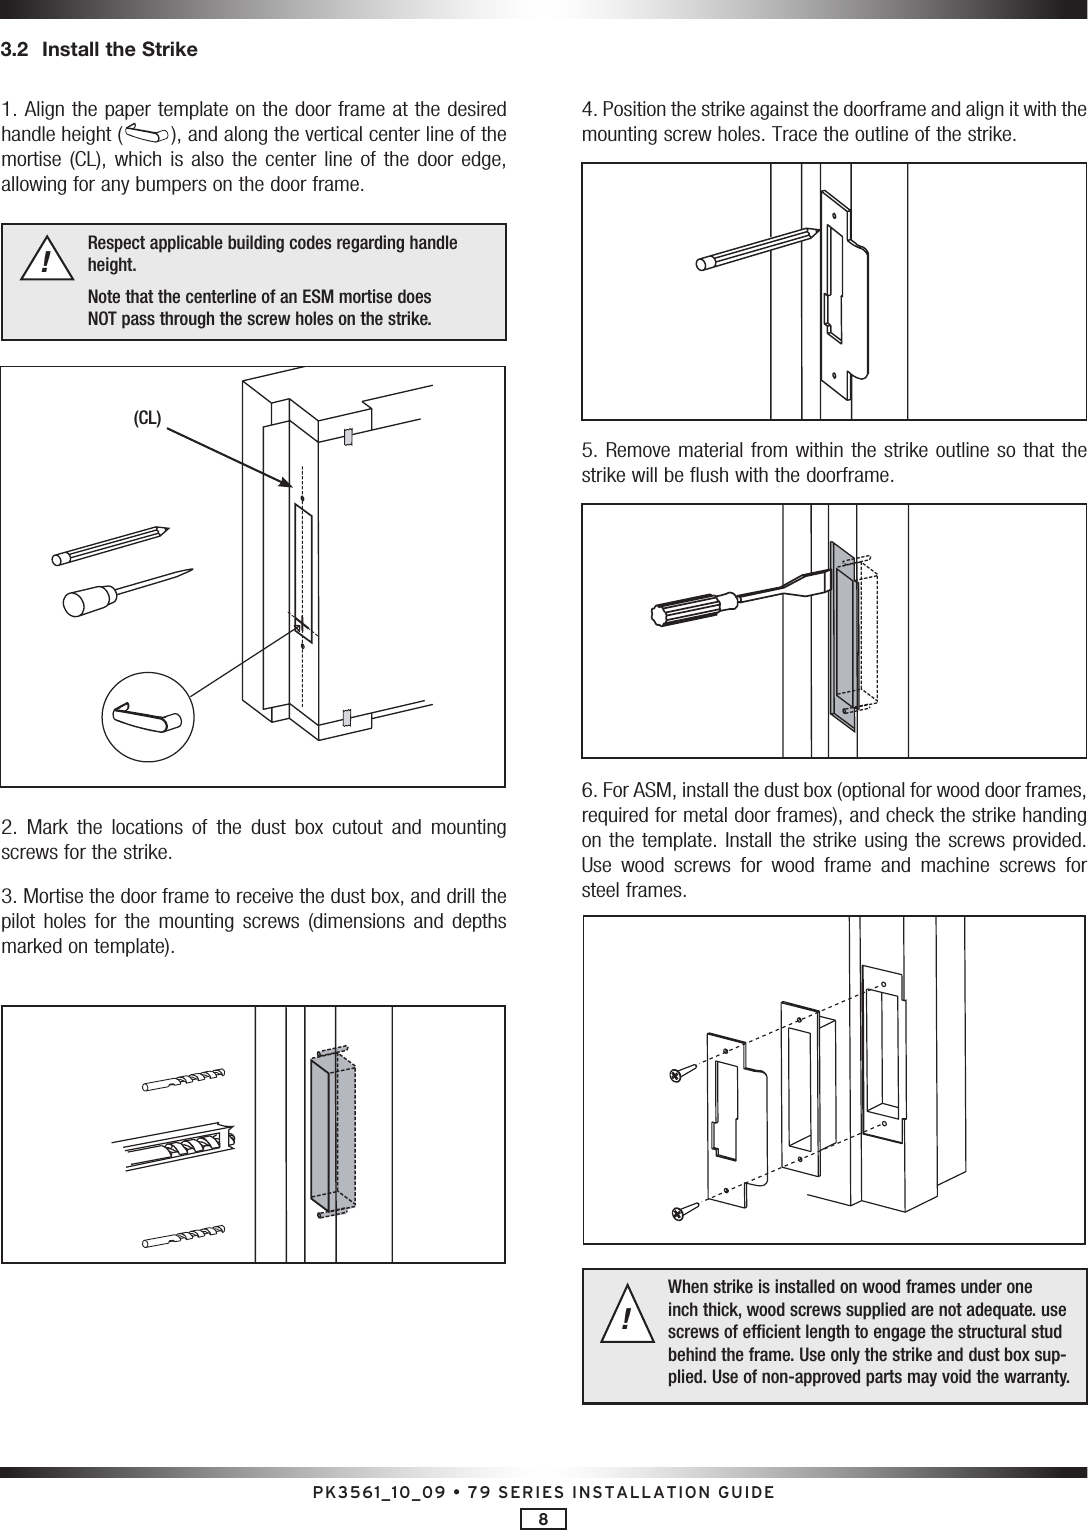 PK3561_10_09 • 79 SERIES INSTALLATION GUIDE83.2  Install the Strike1. Align the paper template on the door frame at the desired handle height ( ), and along the vertical center line of the mortise (CL),  which  is also  the  center line  of  the door  edge, allowing for any bumpers on the door frame. Respect applicable building codes regarding handle height.Note that the centerline of an ESM mortise does  NOT pass through the screw holes on the strike. !2.  Mark  the  locations  of  the  dust  box  cutout  and  mounting screws for the strike.3. Mortise the door frame to receive the dust box, and drill the pilot  holes  for  the  mounting  screws  (dimensions  and  depths marked on template).4. Position the strike against the doorframe and align it with the  mounting screw holes. Trace the outline of the strike.5. Remove material from within the strike outline so that the strike will be flush with the doorframe.6. For ASM, install the dust box (optional for wood door frames, required for metal door frames), and check the strike handing on the template. Install the strike using the screws provided. Use  wood  screws  for  wood  frame  and  machine  screws  for steel frames.When strike is installed on wood frames under one inch thick, wood screws supplied are not adequate. use screws of efficient length to engage the structural stud behind the frame. Use only the strike and dust box sup-plied. Use of non-approved parts may void the warranty. !(CL)